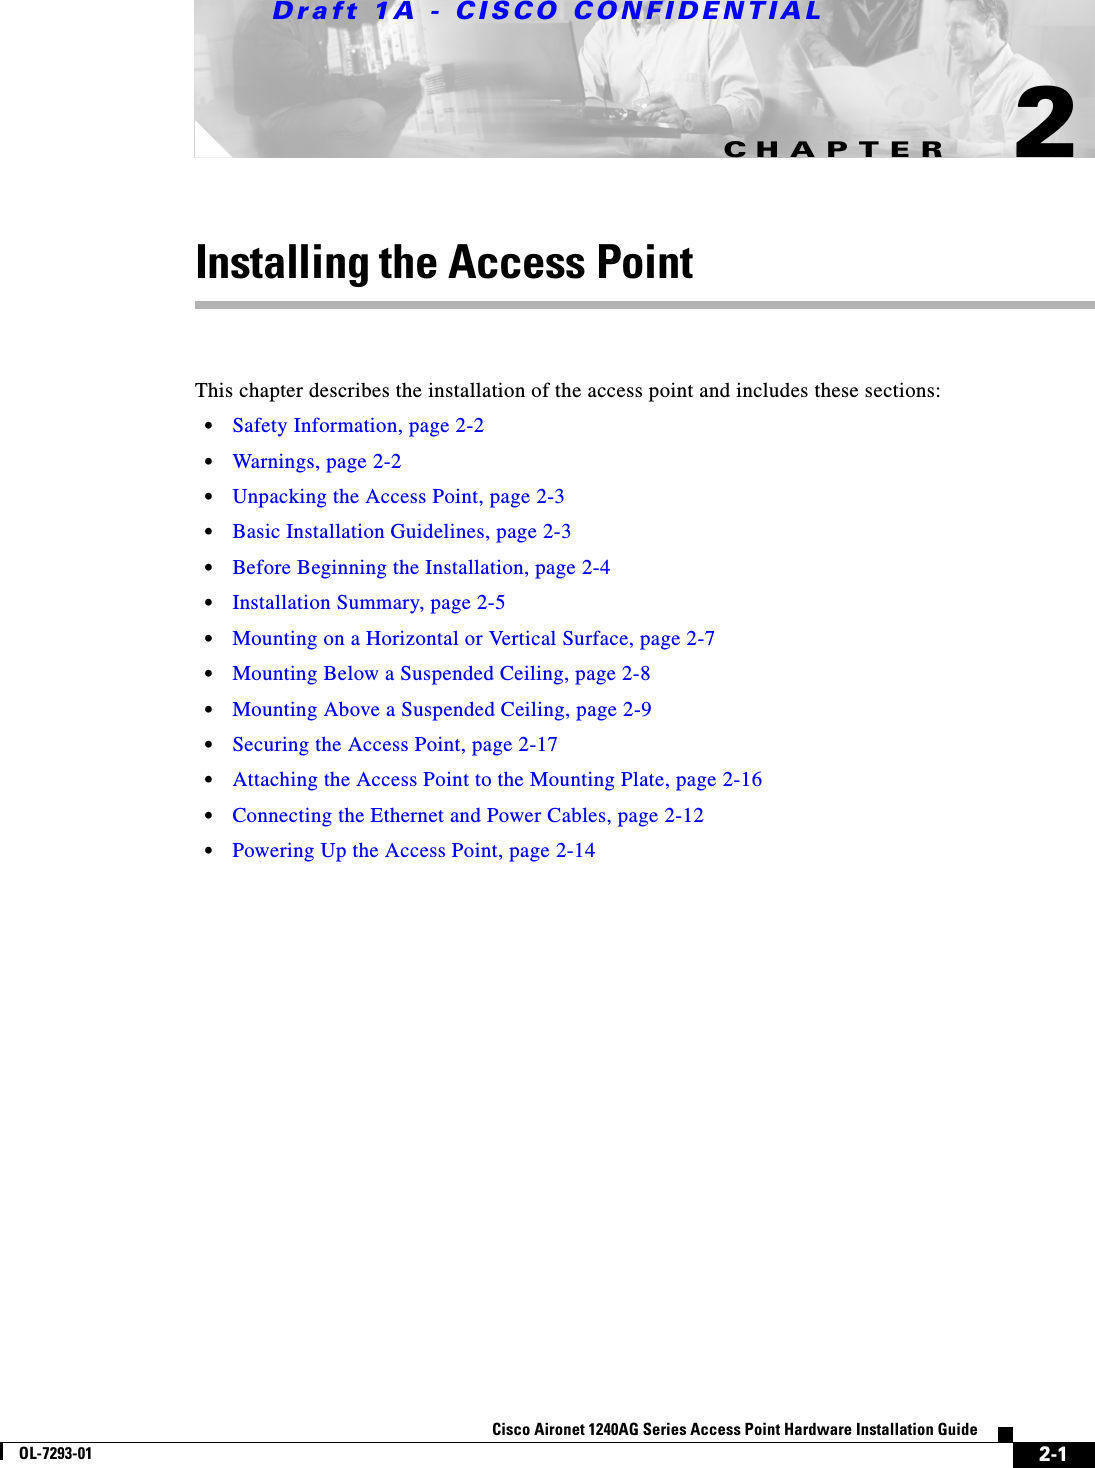 CHAPTERDraft 1A - CISCO CONFIDENTIAL2-1Cisco Aironet 1240AG Series Access Point Hardware Installation GuideOL-7293-012Installing the Access PointThis chapter describes the installation of the access point and includes these sections:•Safety Information, page 2-2•Warnings, page 2-2•Unpacking the Access Point, page 2-3•Basic Installation Guidelines, page 2-3•Before Beginning the Installation, page 2-4•Installation Summary, page 2-5•Mounting on a Horizontal or Vertical Surface, page 2-7•Mounting Below a Suspended Ceiling, page 2-8•Mounting Above a Suspended Ceiling, page 2-9•Securing the Access Point, page 2-17•Attaching the Access Point to the Mounting Plate, page 2-16•Connecting the Ethernet and Power Cables, page 2-12•Powering Up the Access Point, page 2-14